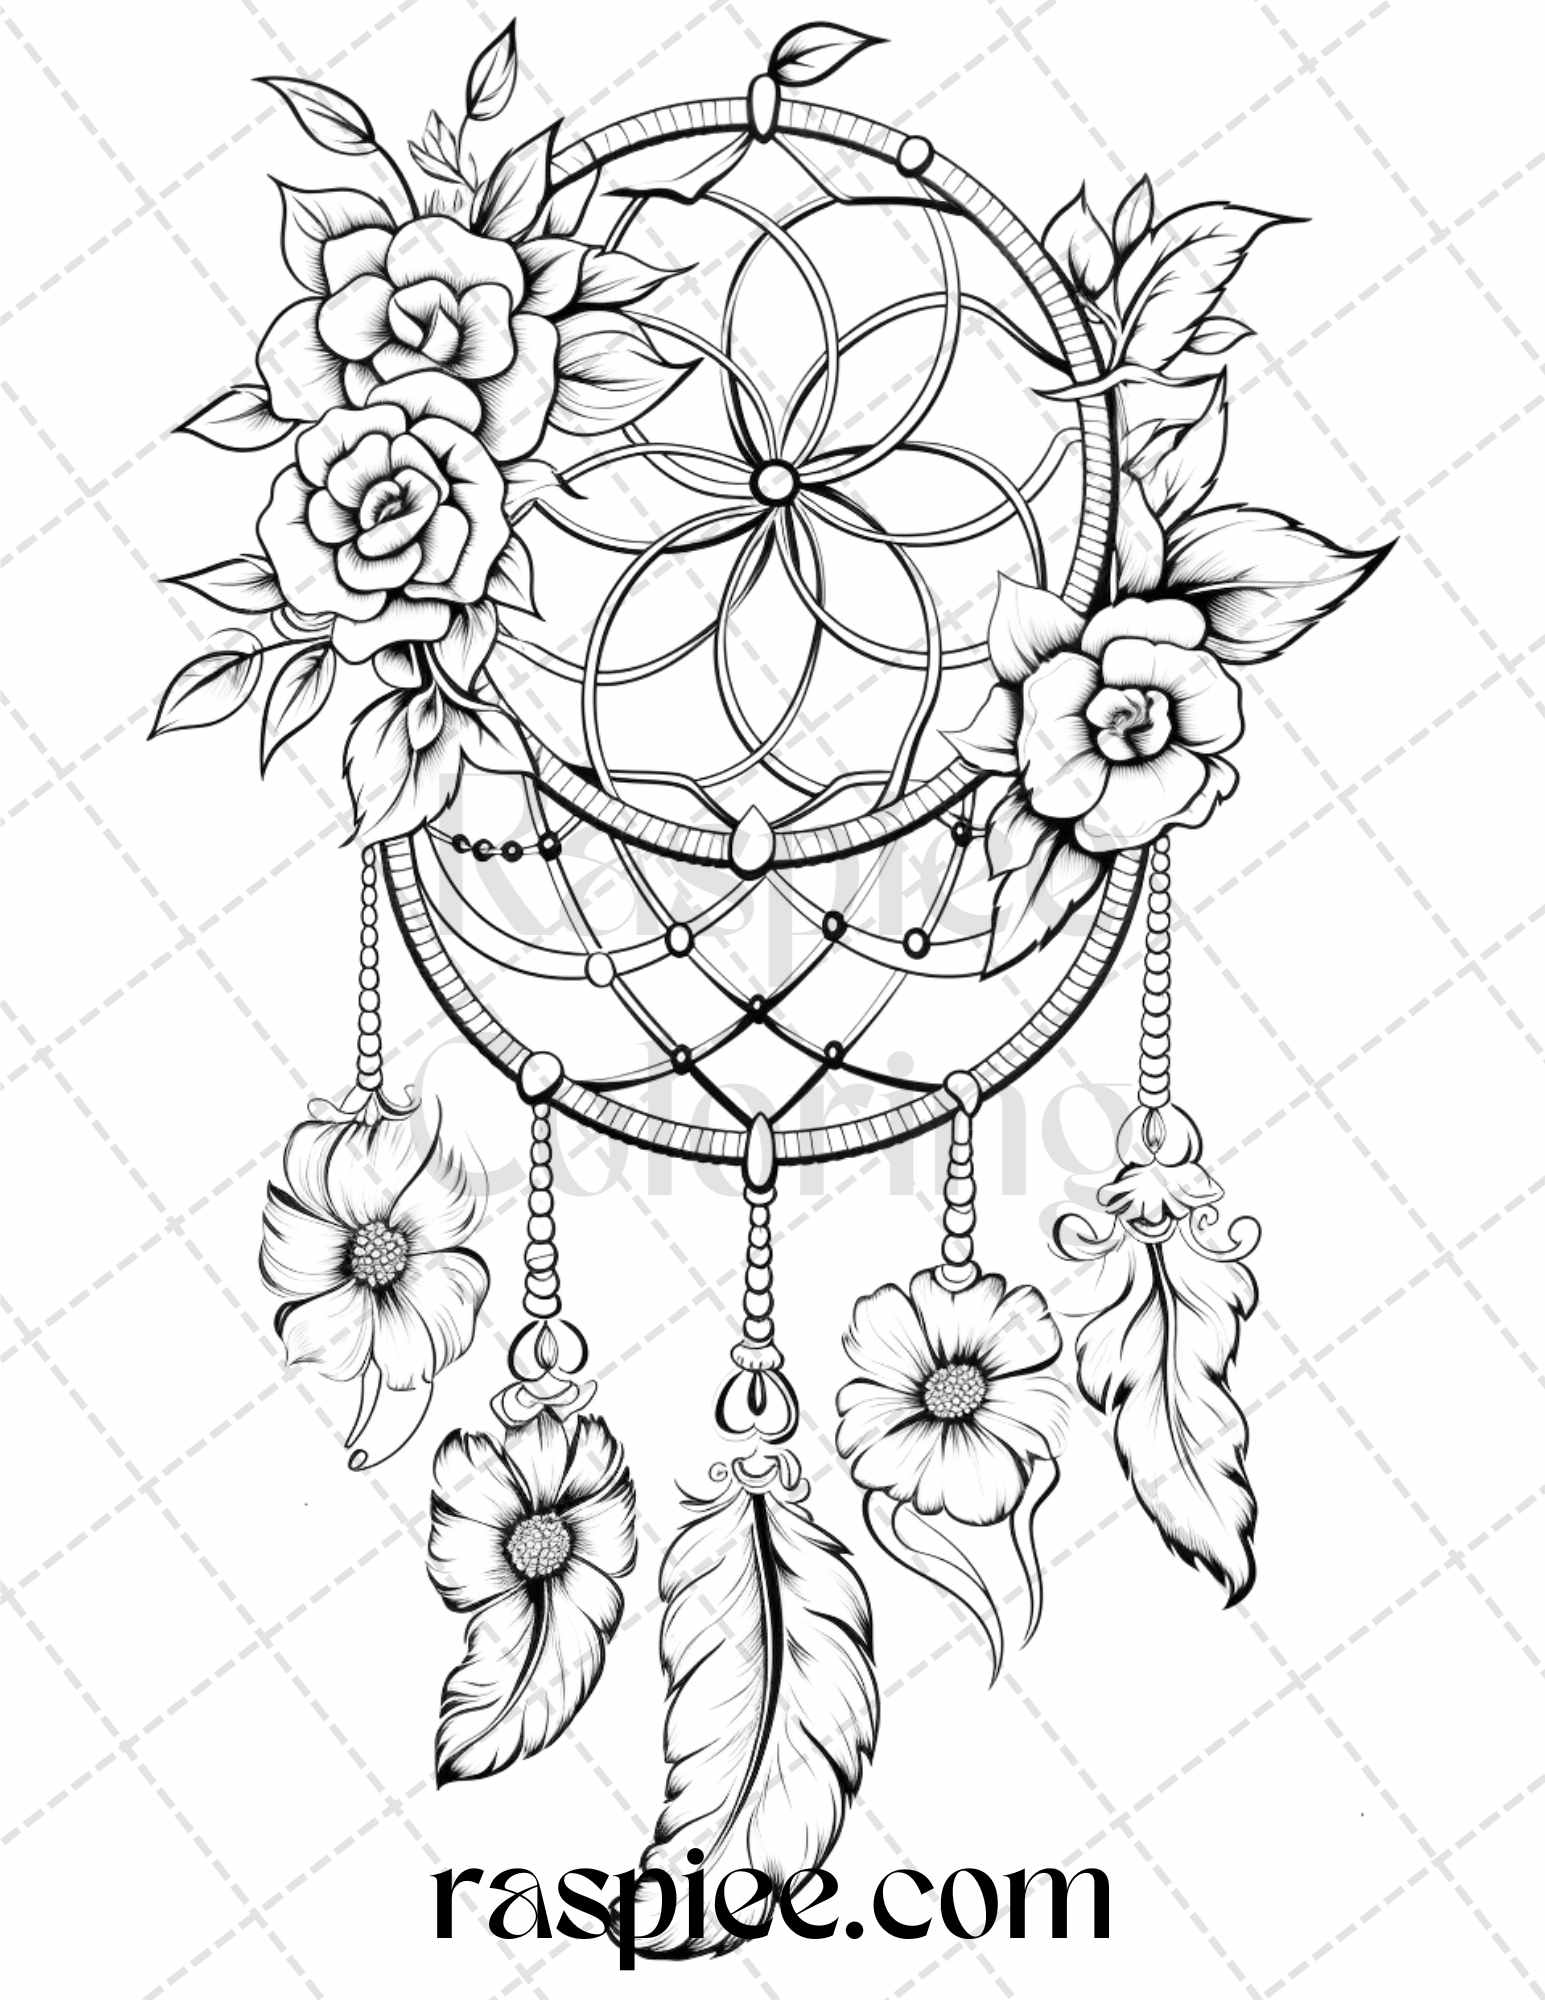 30 Flower Dreamcatcher Grayscale Coloring Pages Printable for Adults, PDF File Instant Download - raspiee